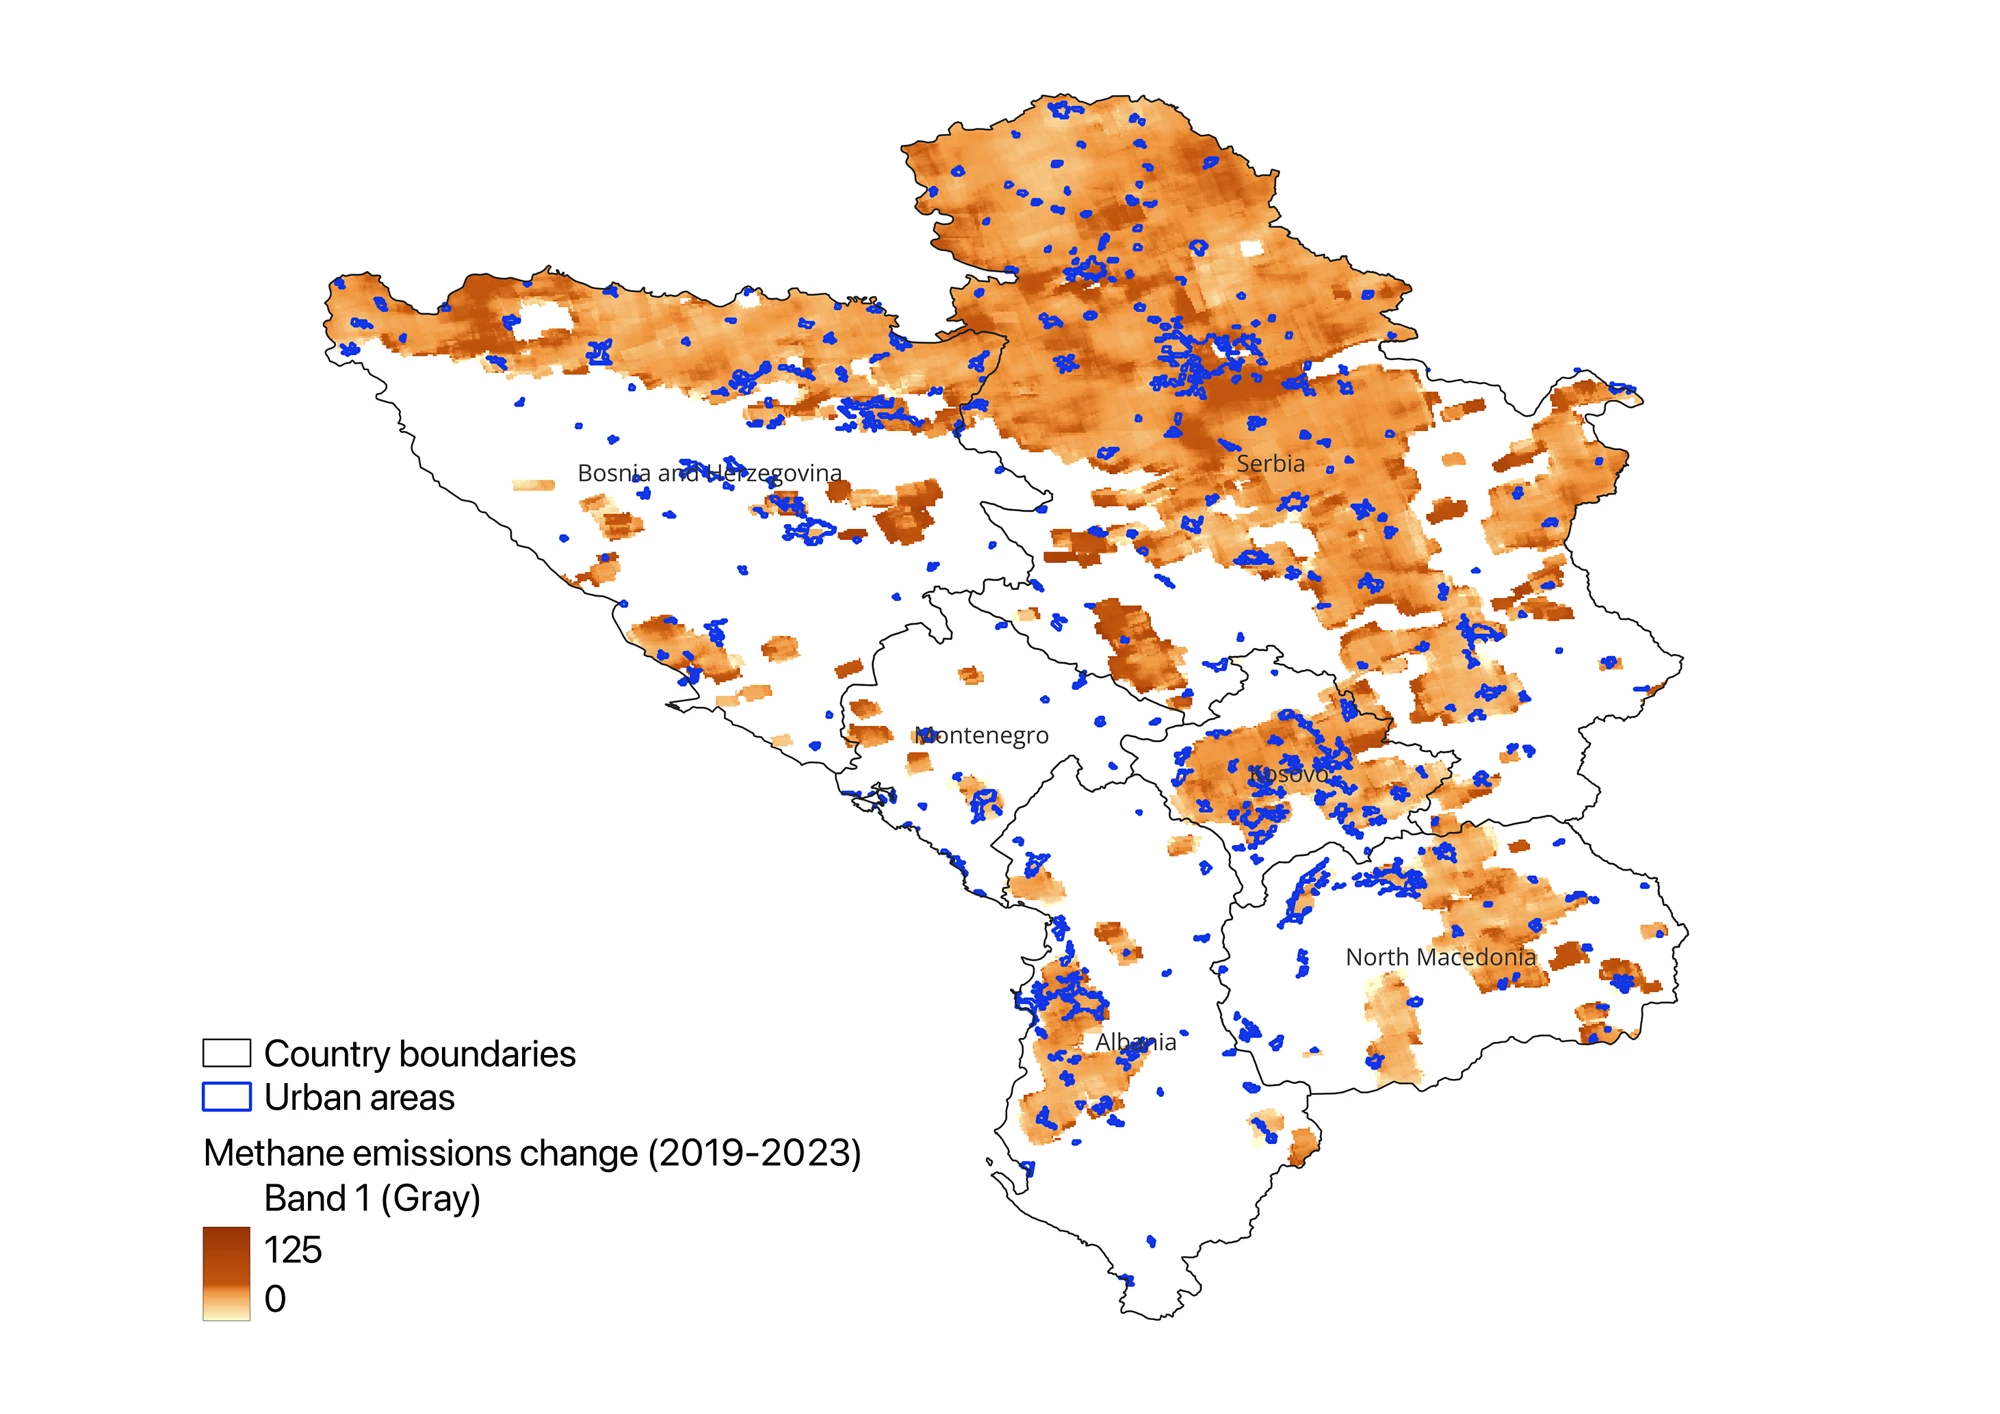 Map showing methane growth rate in country boundaries and urban areas in the Western Balkans.